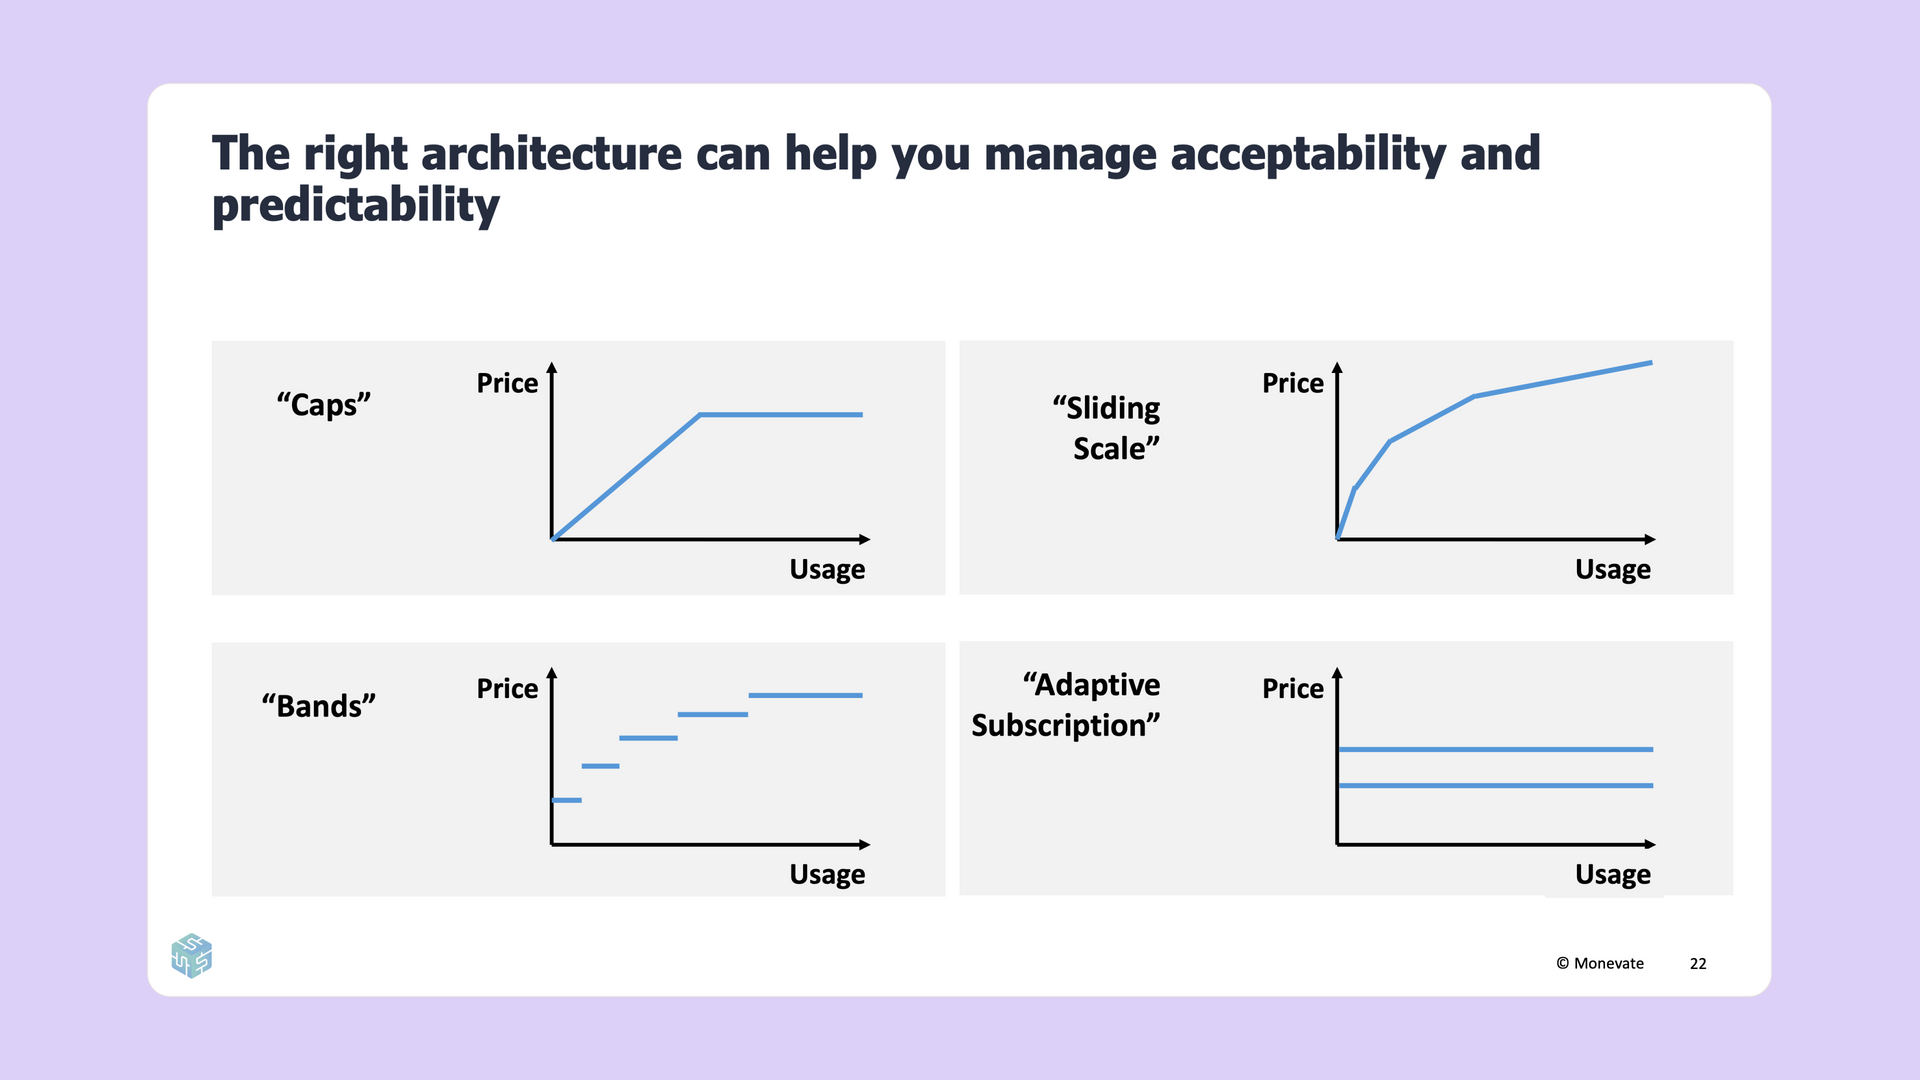 the right architecture can help you manage acceptability and predictability